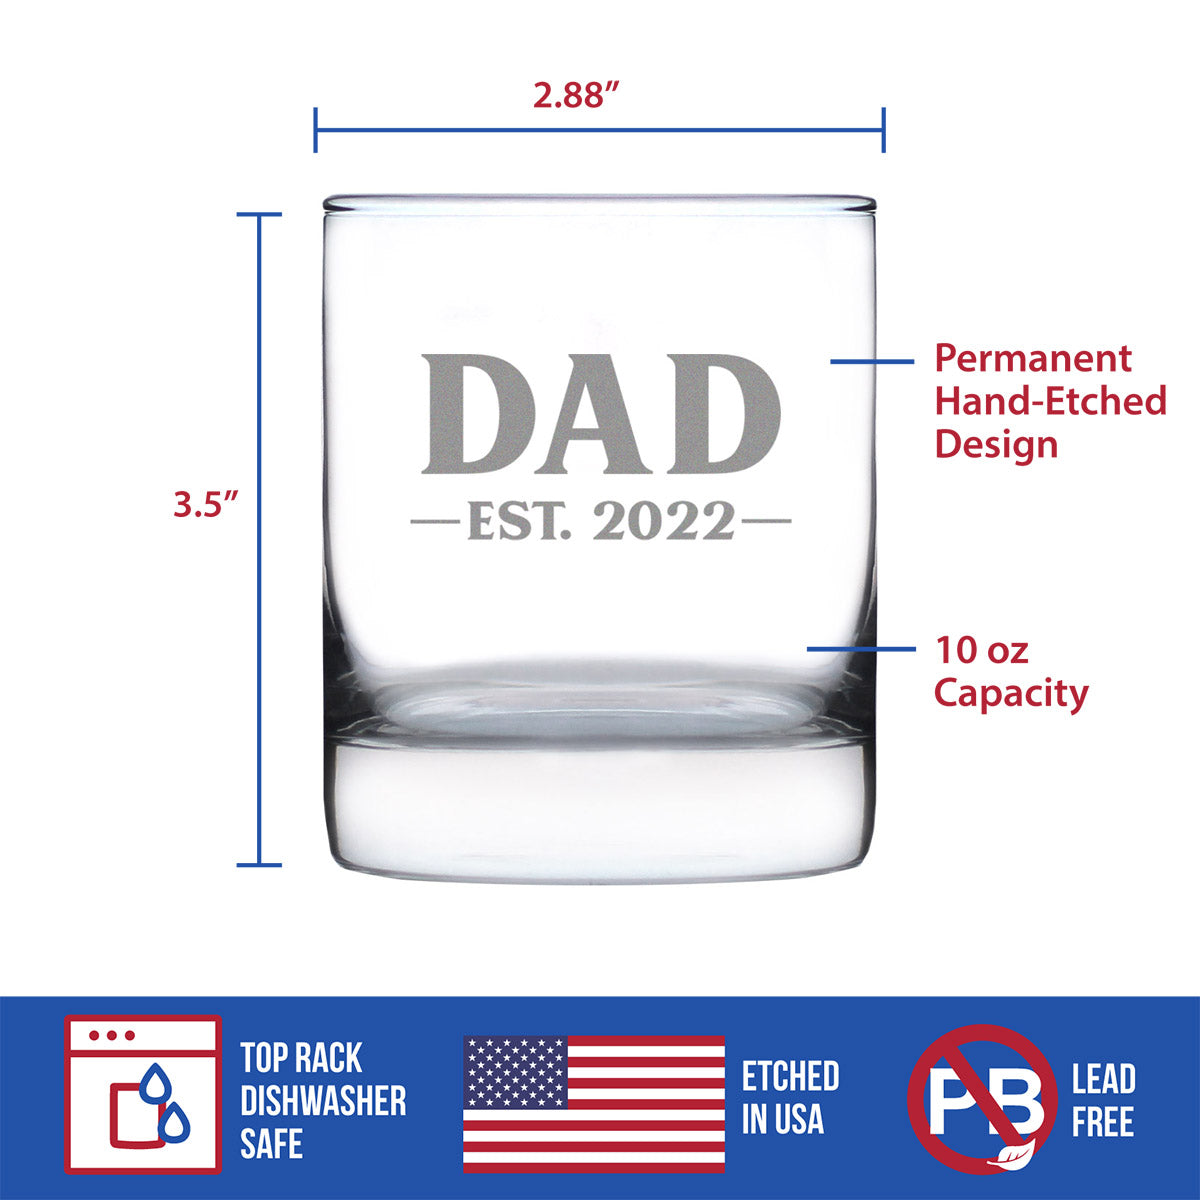 Dad Est 2022 - New Father Whiskey Rocks Glass Gift for First Time Parents - Bold 10.25 Oz Glasses